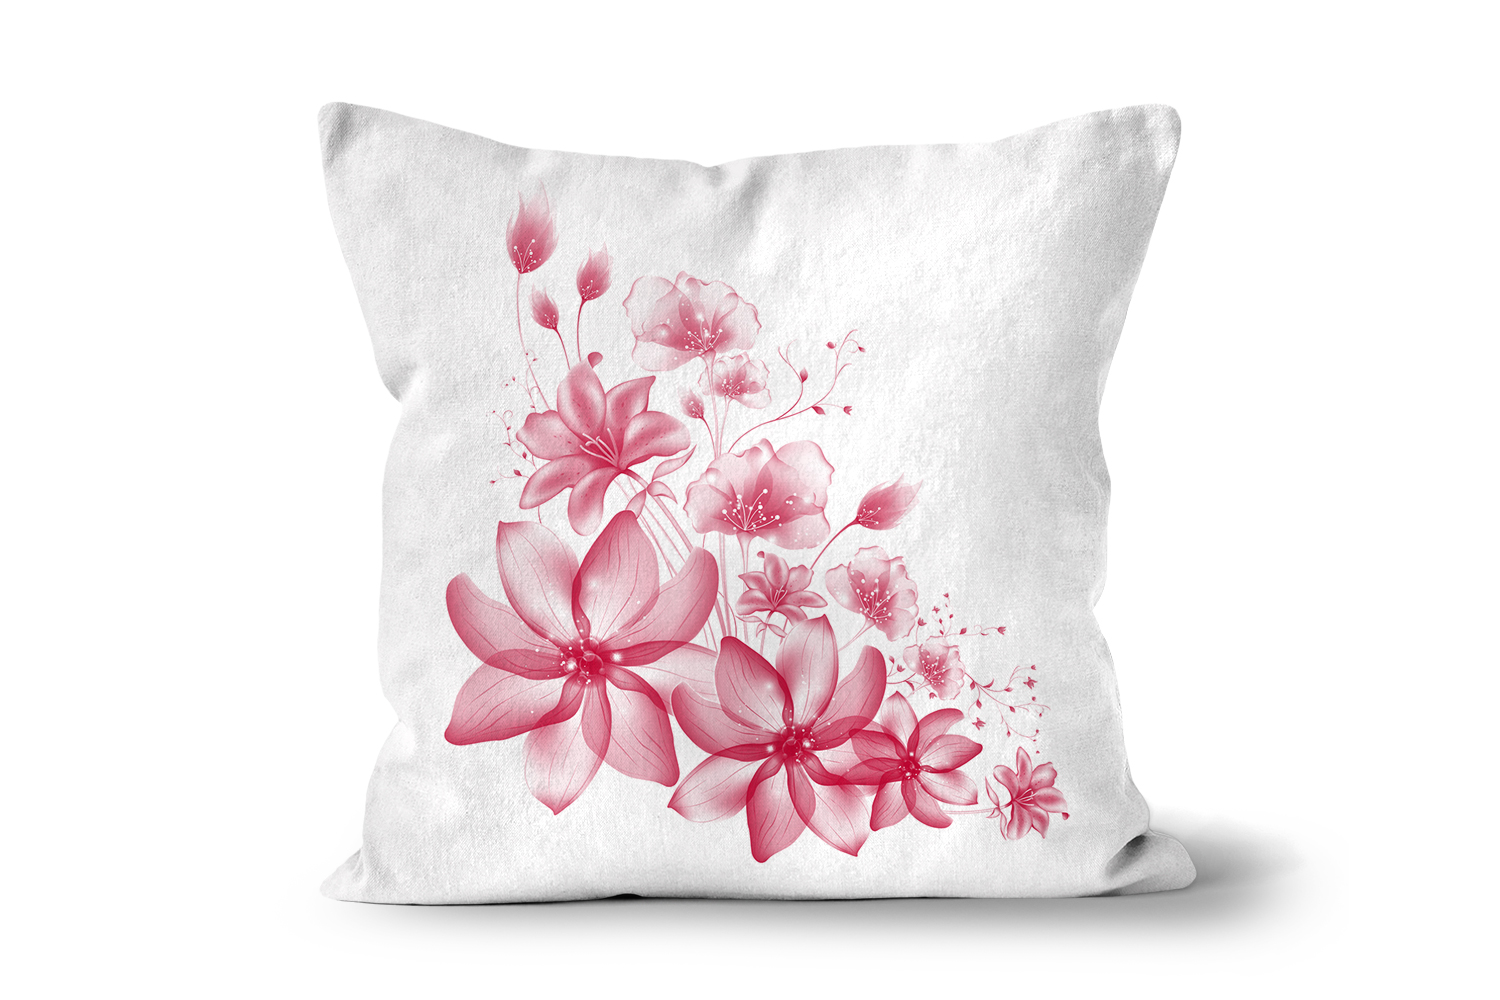 Etherial Flowers Cushions - Square